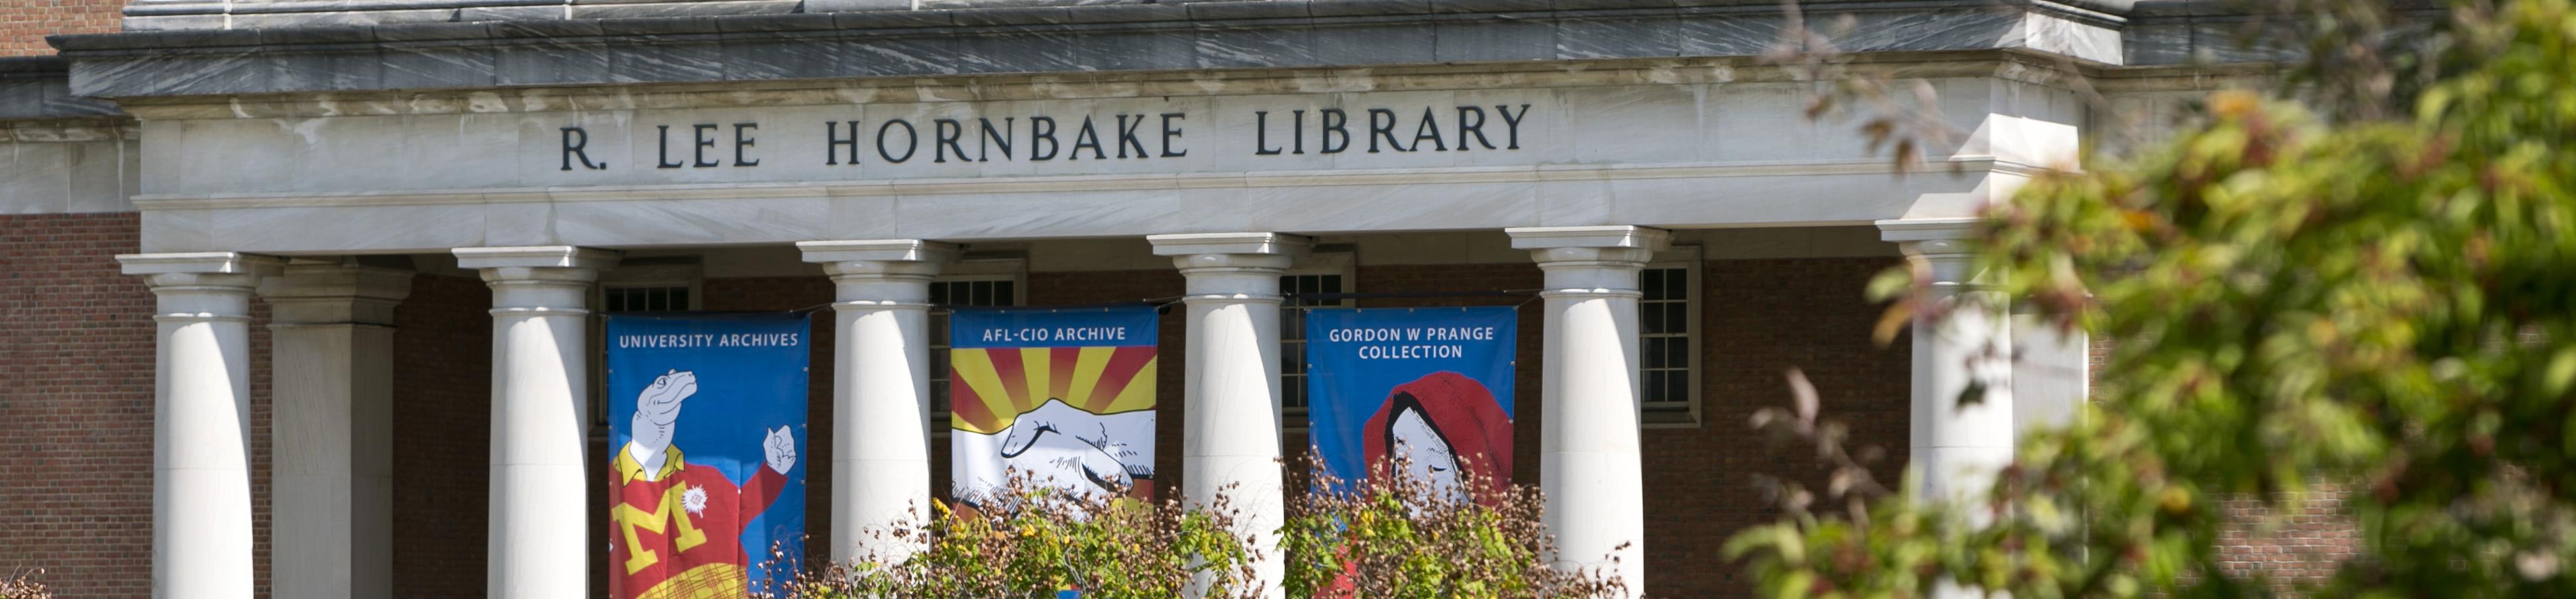 The front of R. Lee Hornbake Library